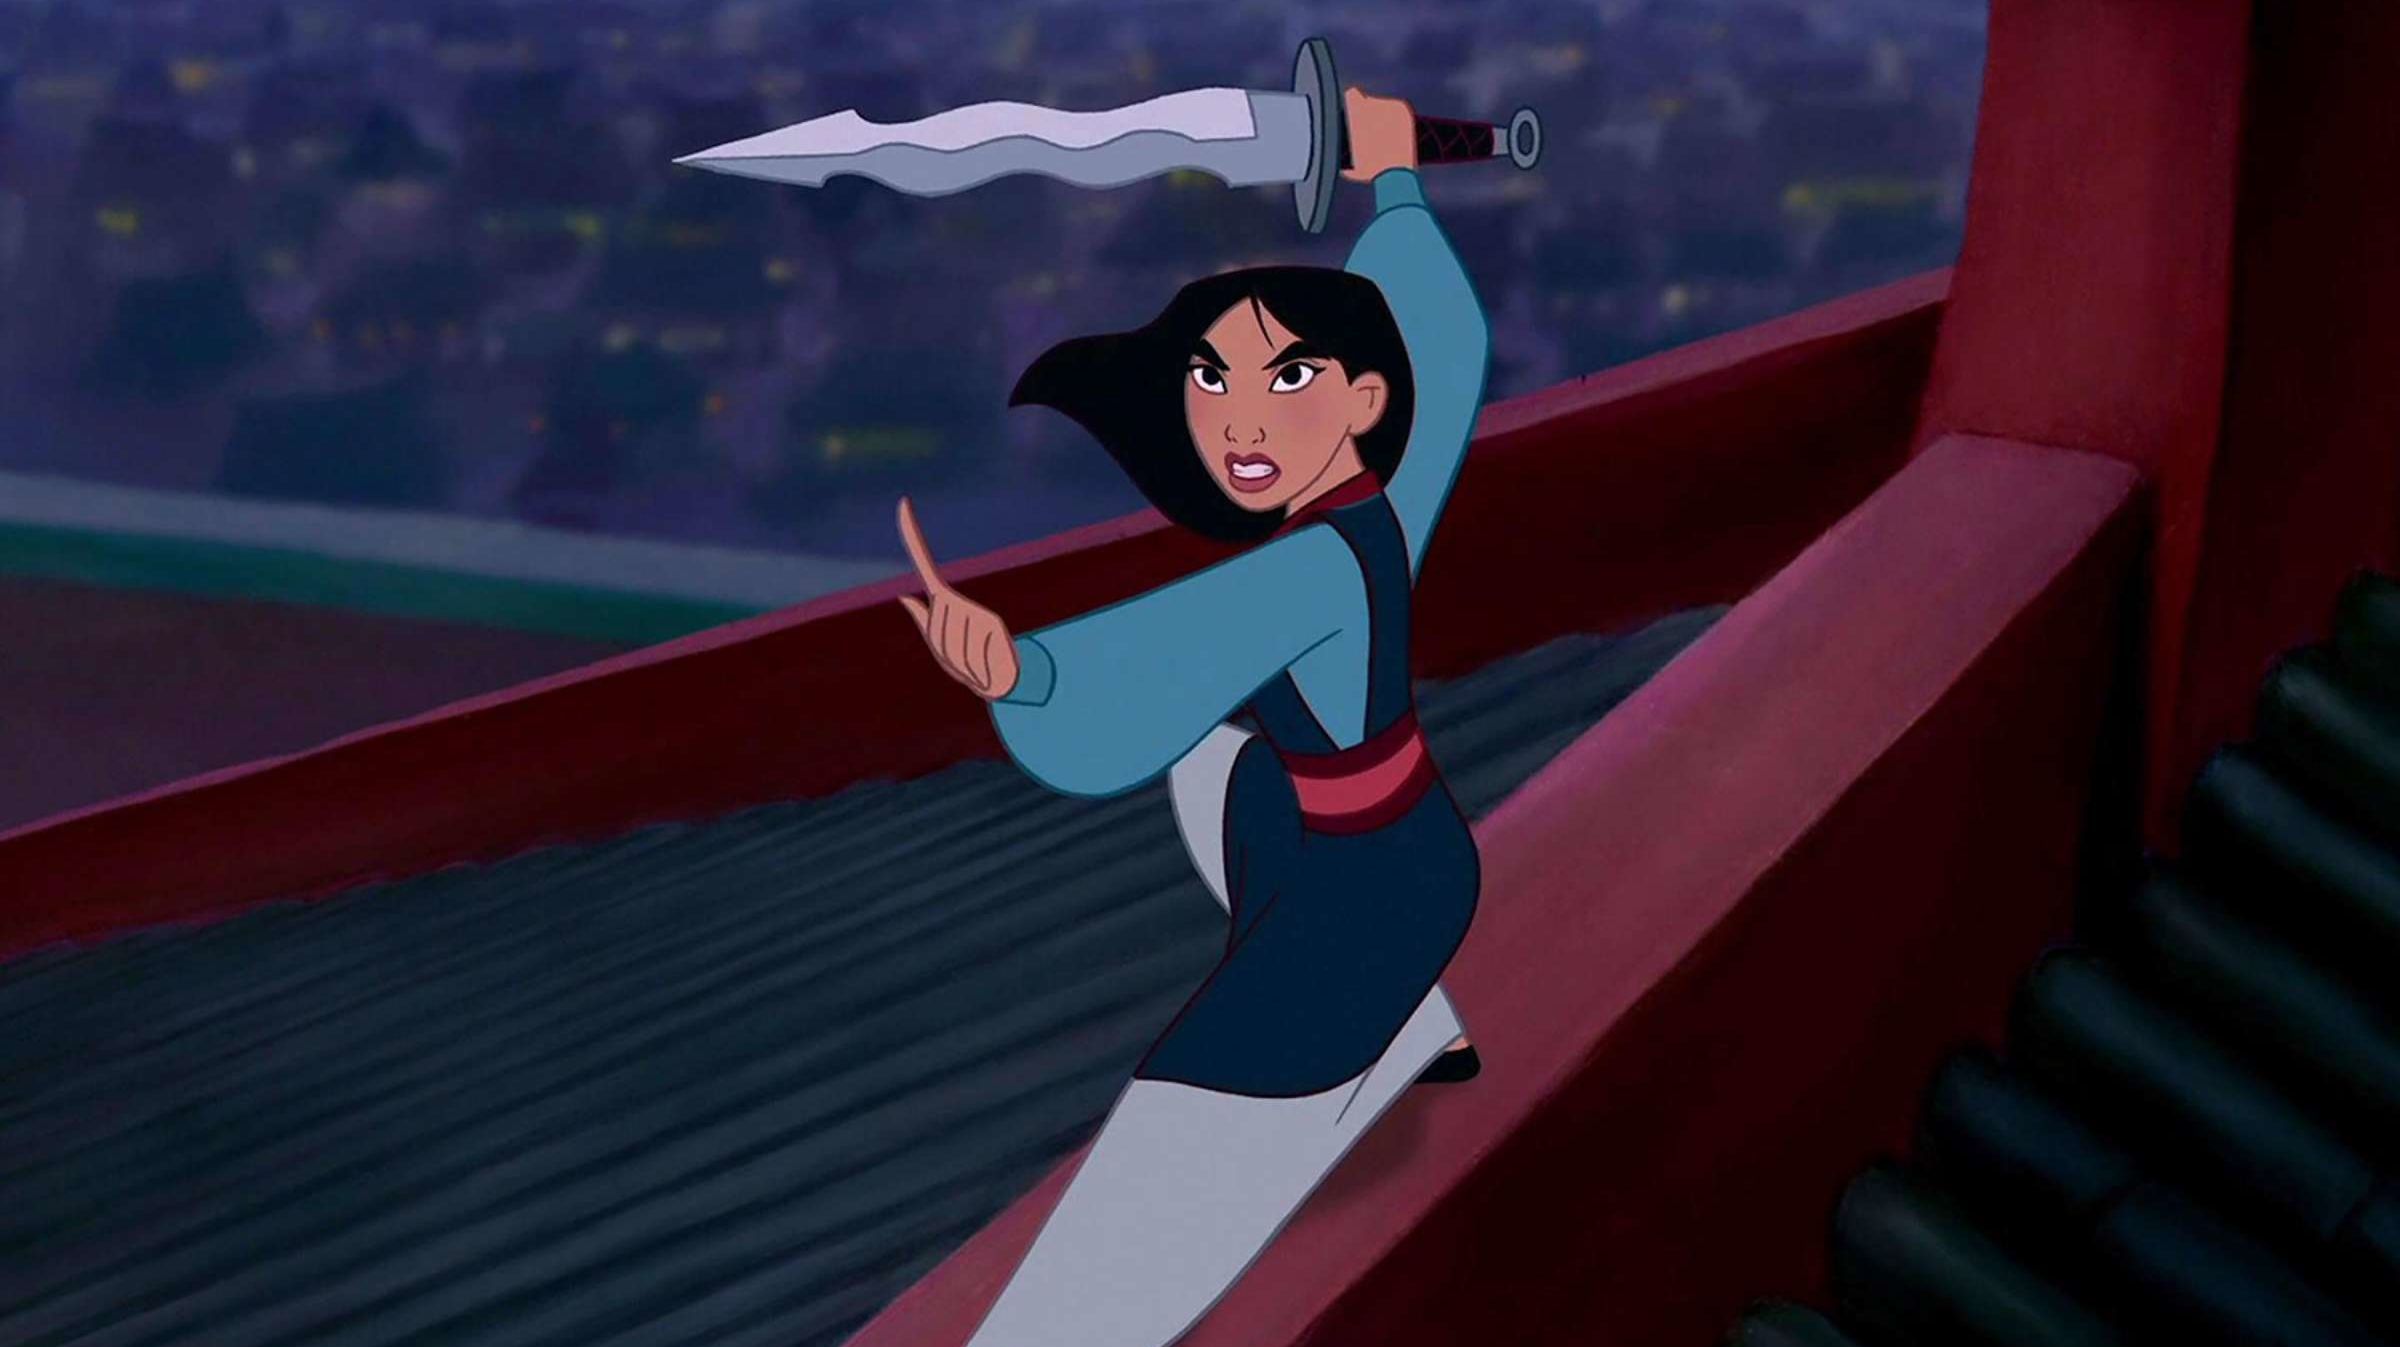 On a rooftop, Mulan, a young woman, stands ready to fight holding a curvy sword above her head.